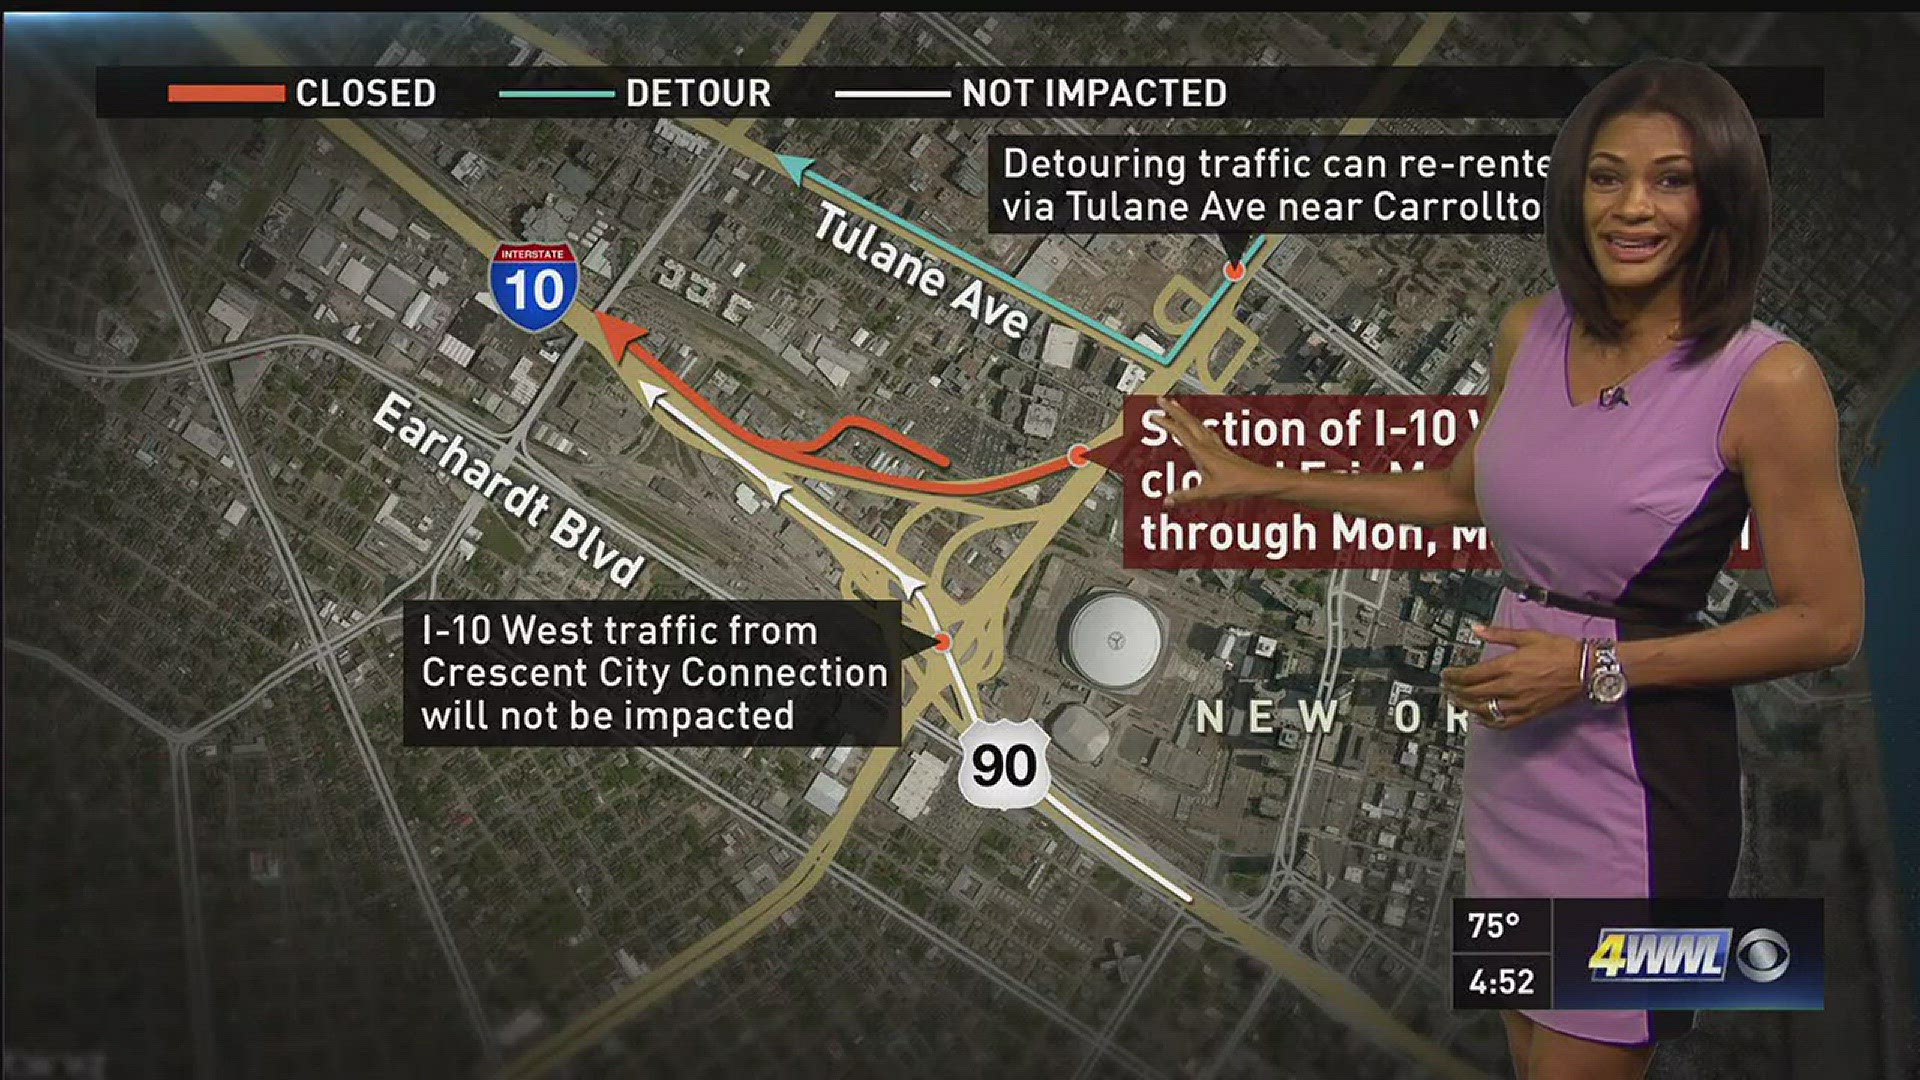 Starting Friday at 10pm, a section of I-10 West will be closed through Monday morning. Motorists can re-enter I-10W at Tulane and Carrollton.